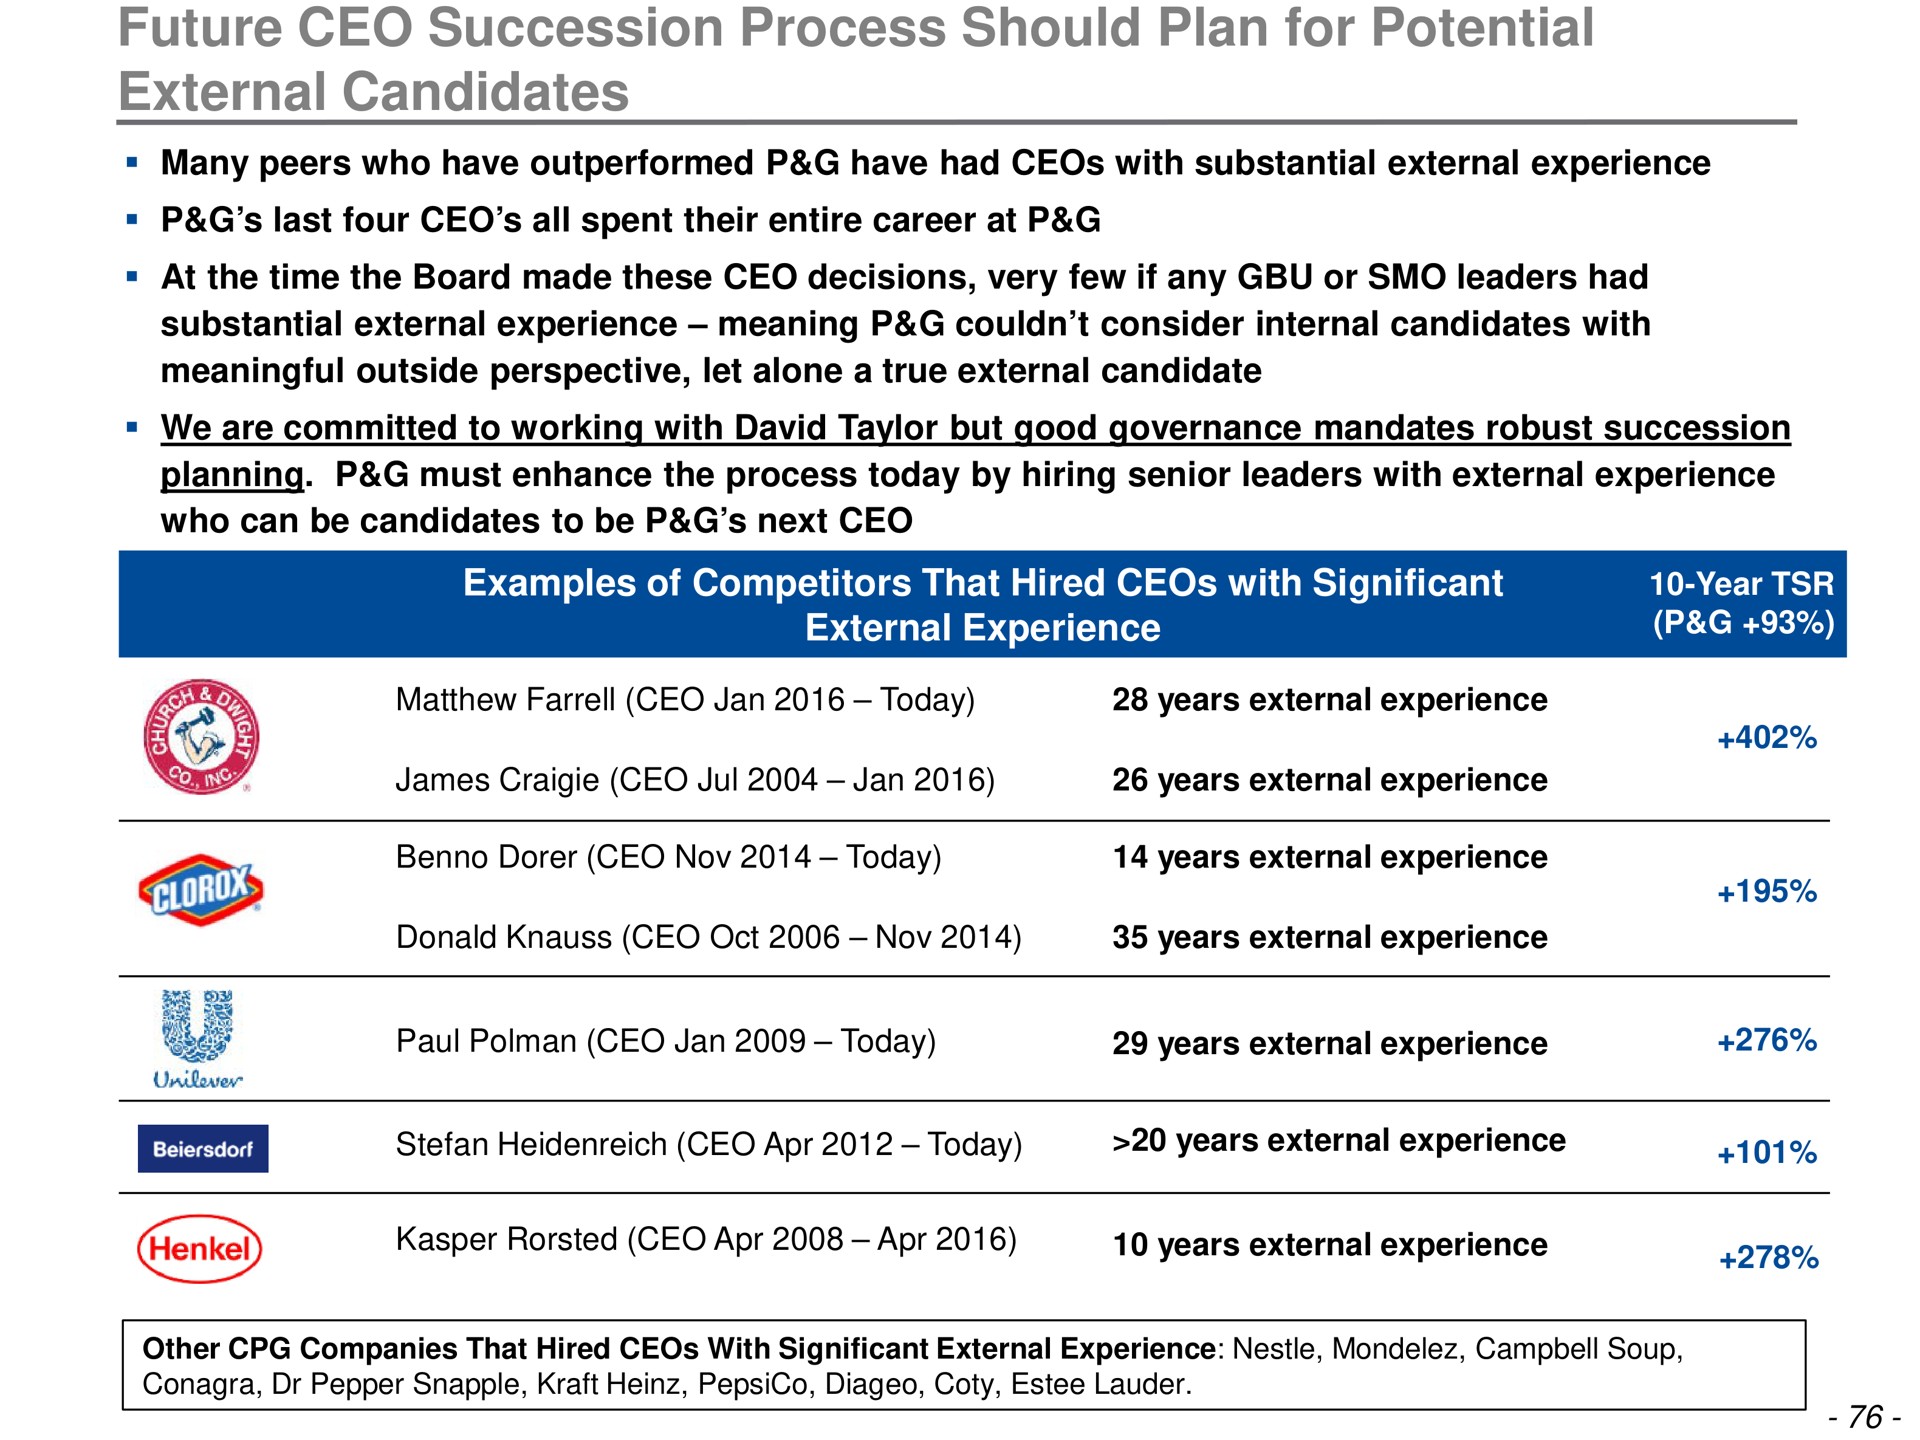 future succession process should plan for potential external candidates today years experience | Trian Partners